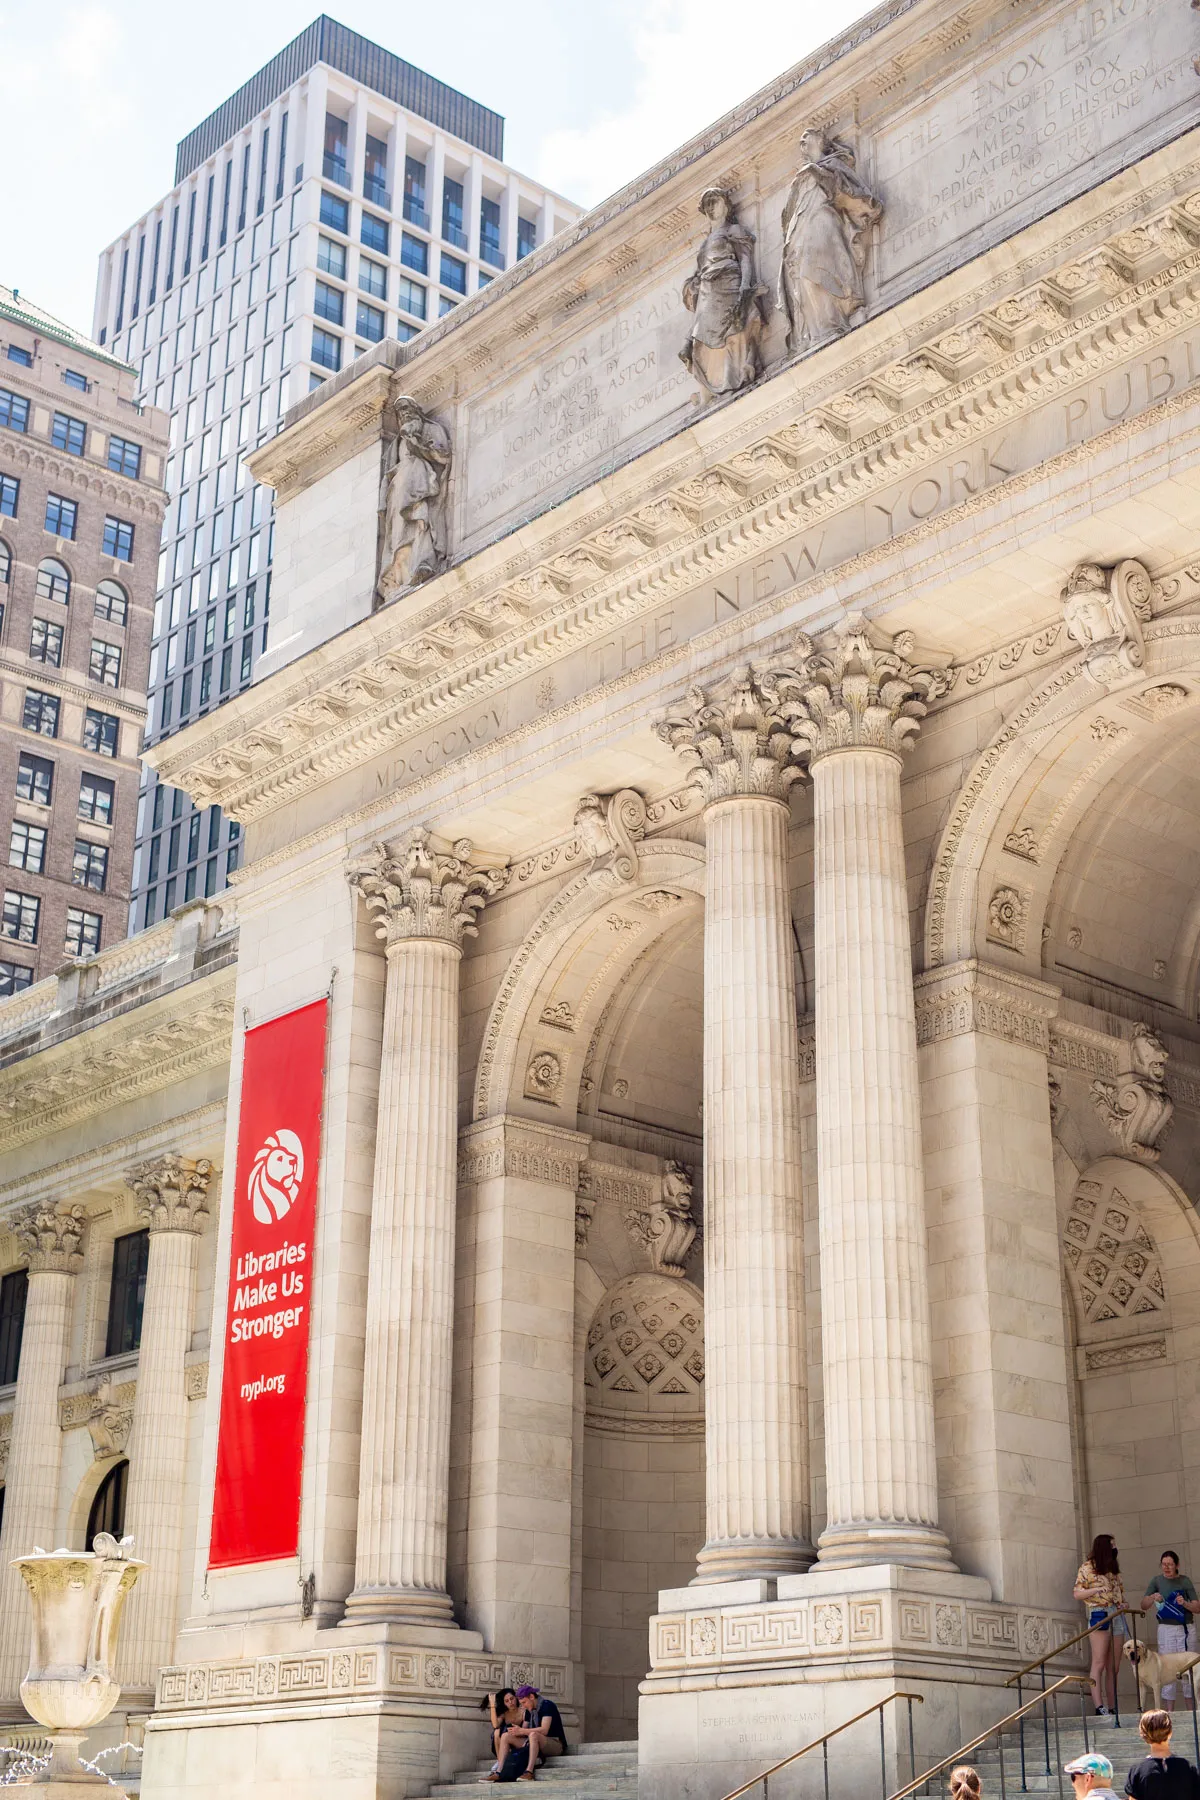 People sitting on the steps of the New York Public Library with a red banner that says "Libraries make us stronger", Marble architecture 